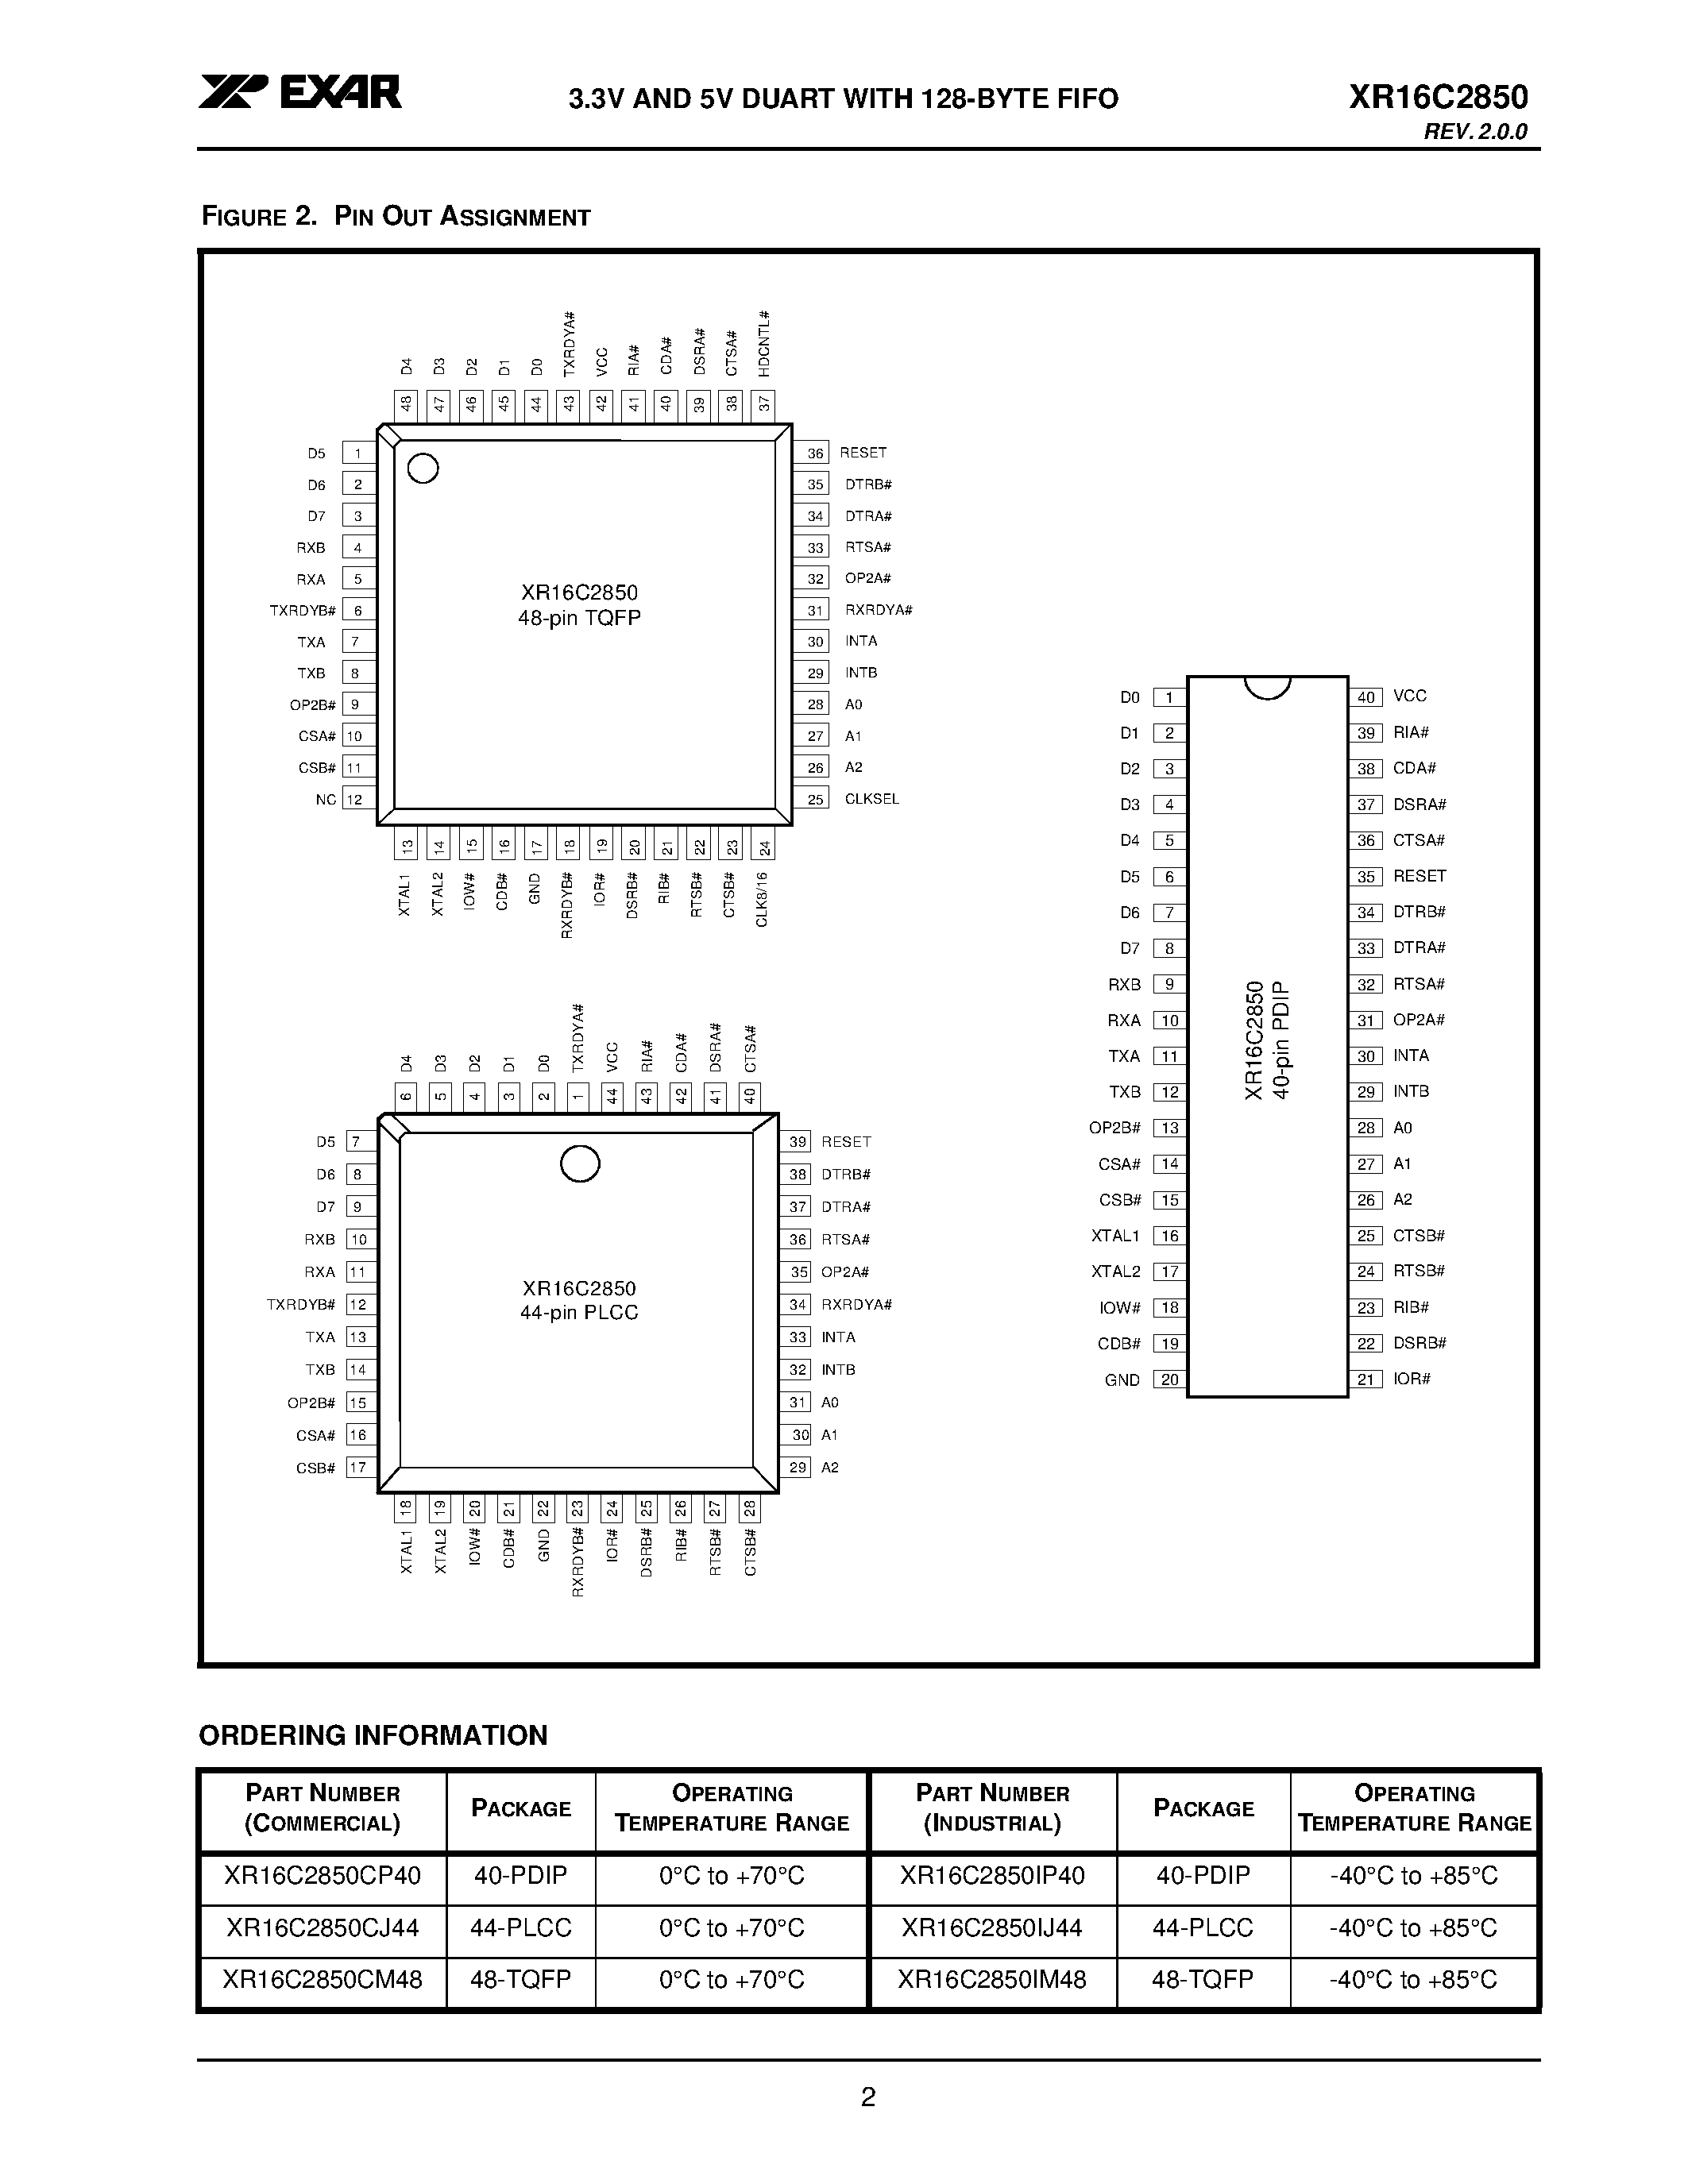 Datasheet XR16C2850IJ44 - 3.3V AND 5V DUART WITH 128-BYTE FIFO page 2